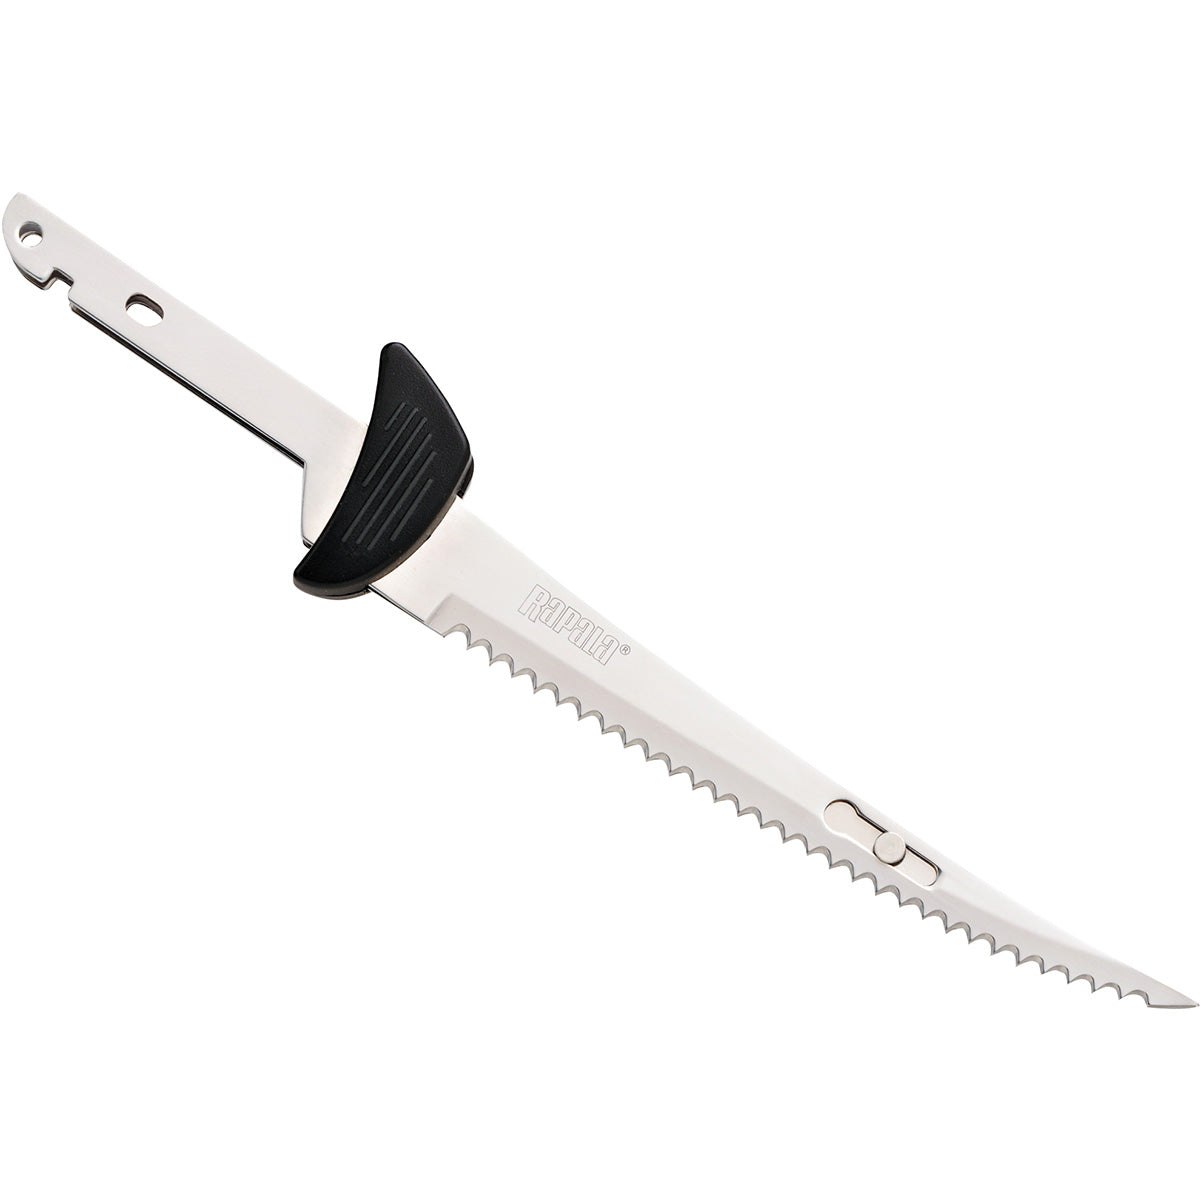 Rapala Replacement Blade for Electric Fillet Knives - Stainless Steel Rapala